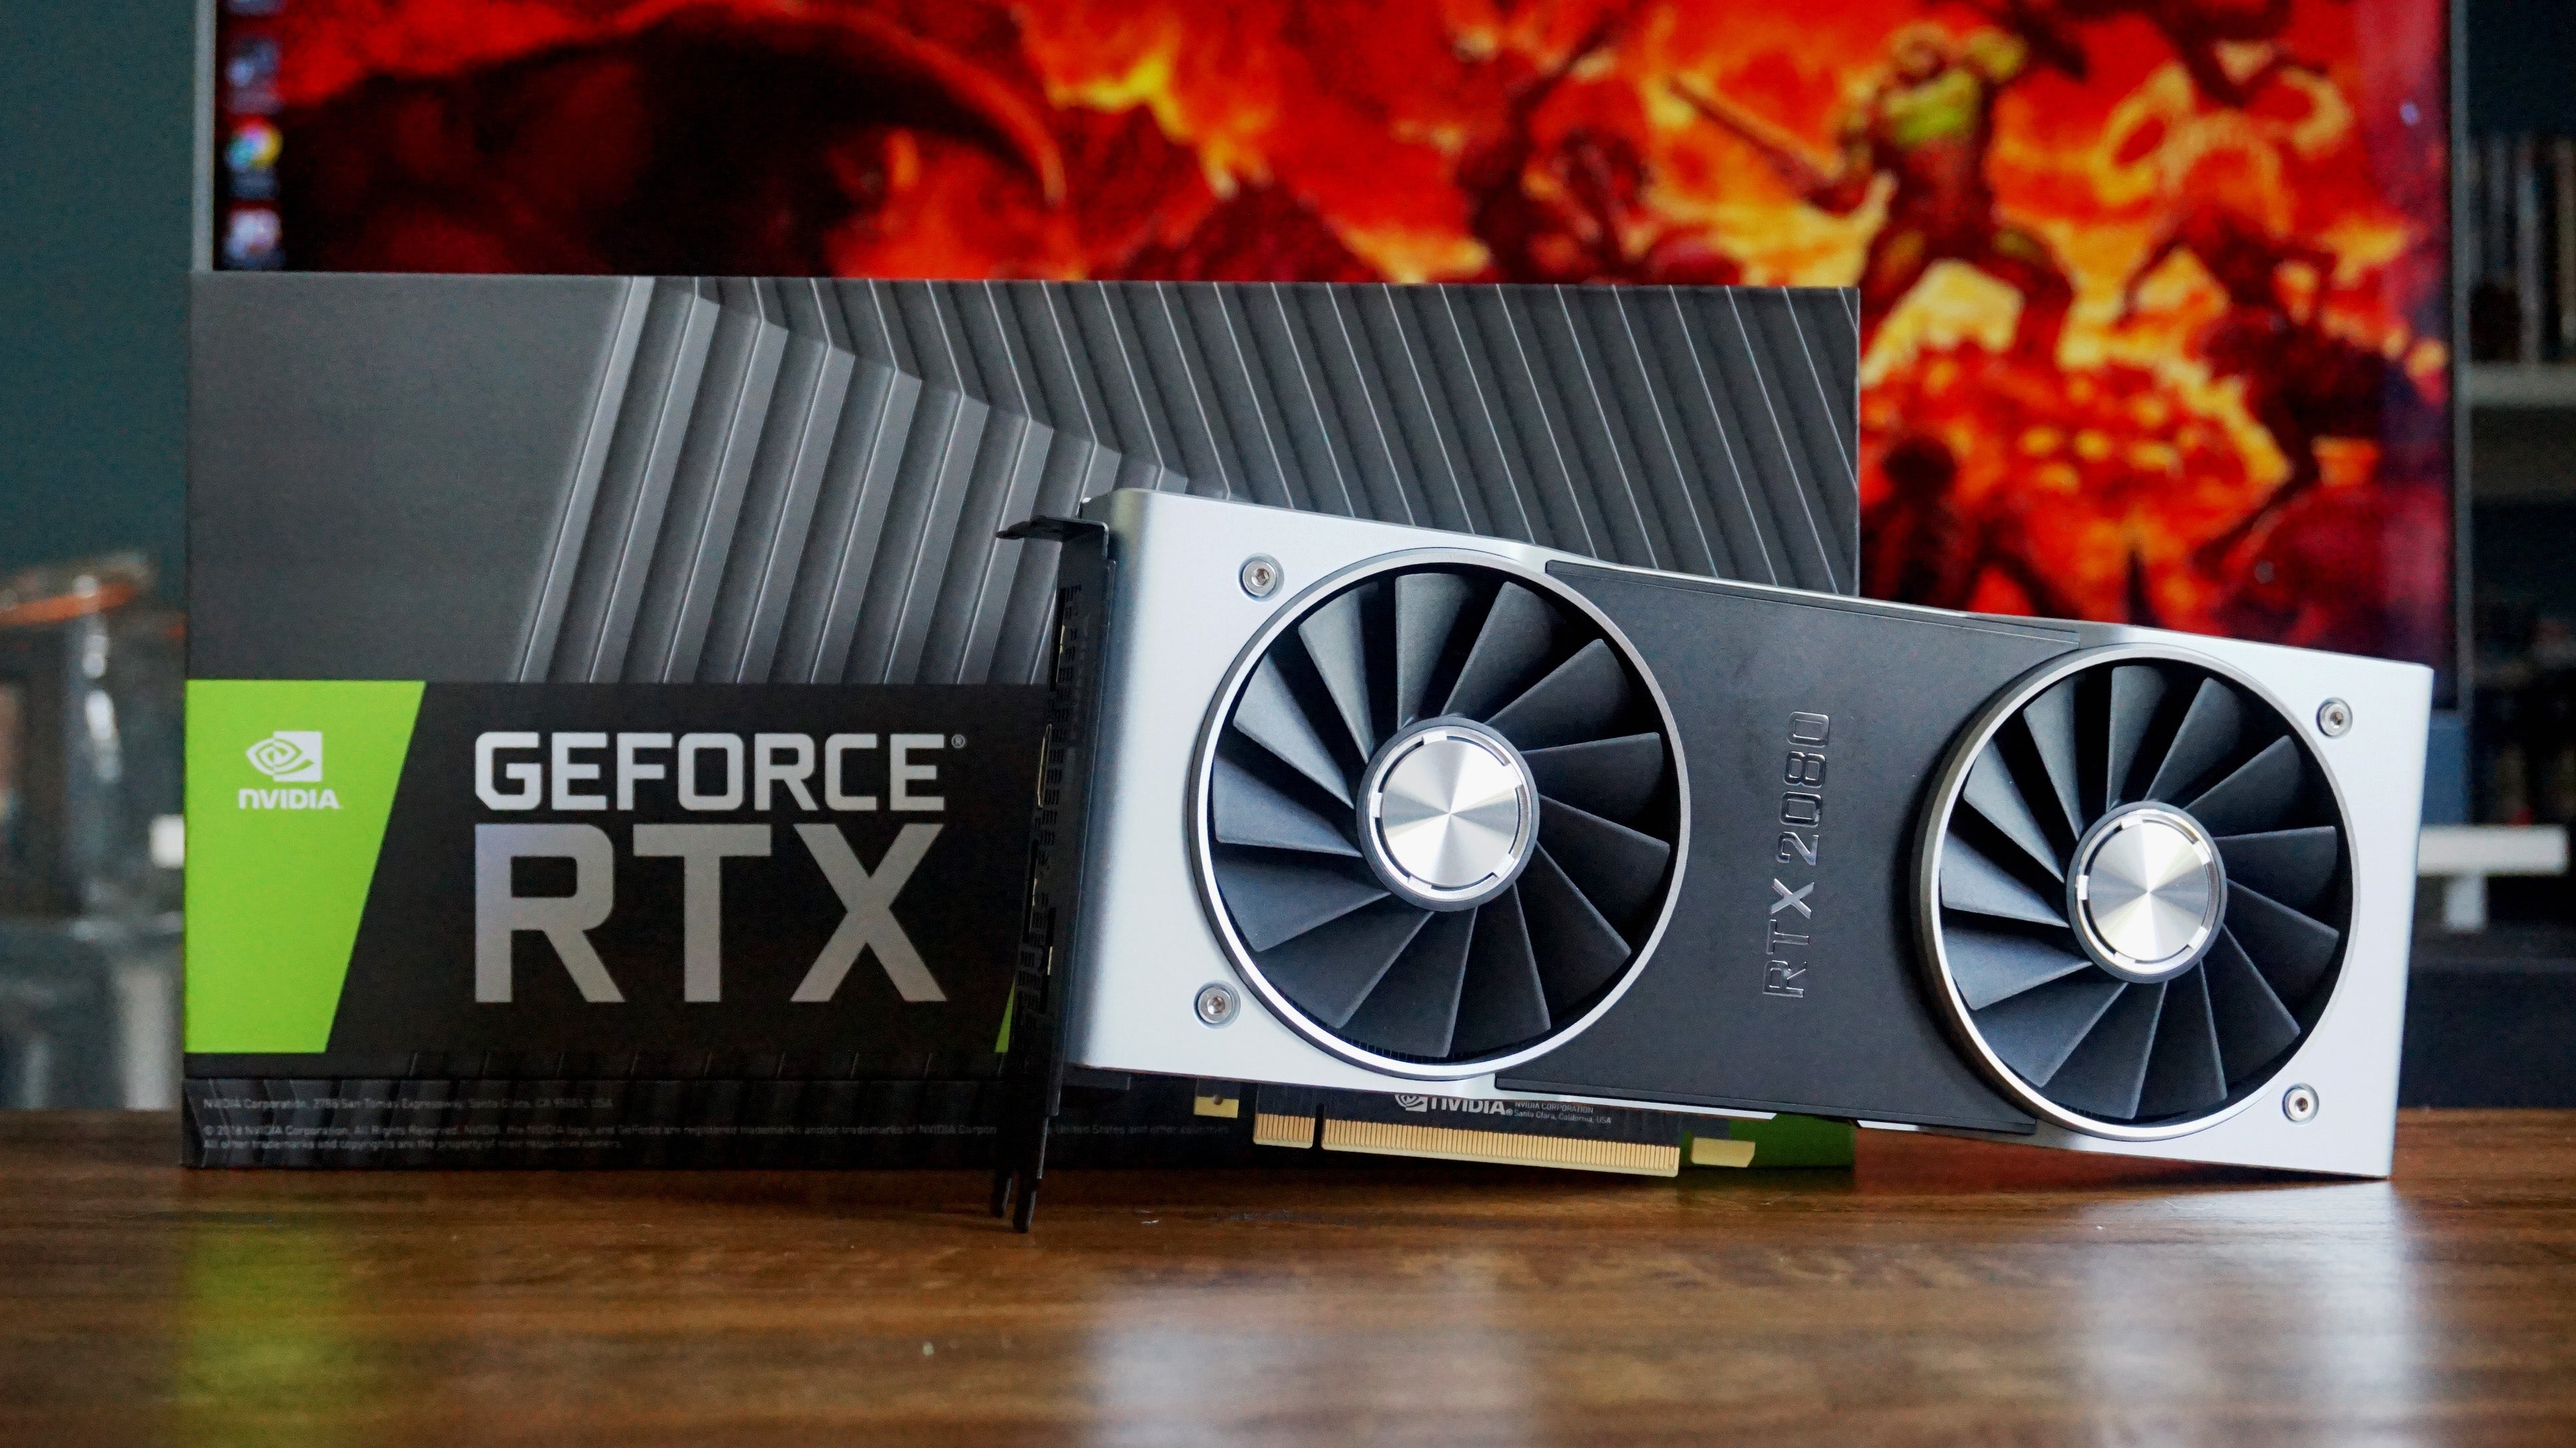 Image for Nvidia GeForce RTX 2080 review: Too much power for a Core i5 PC